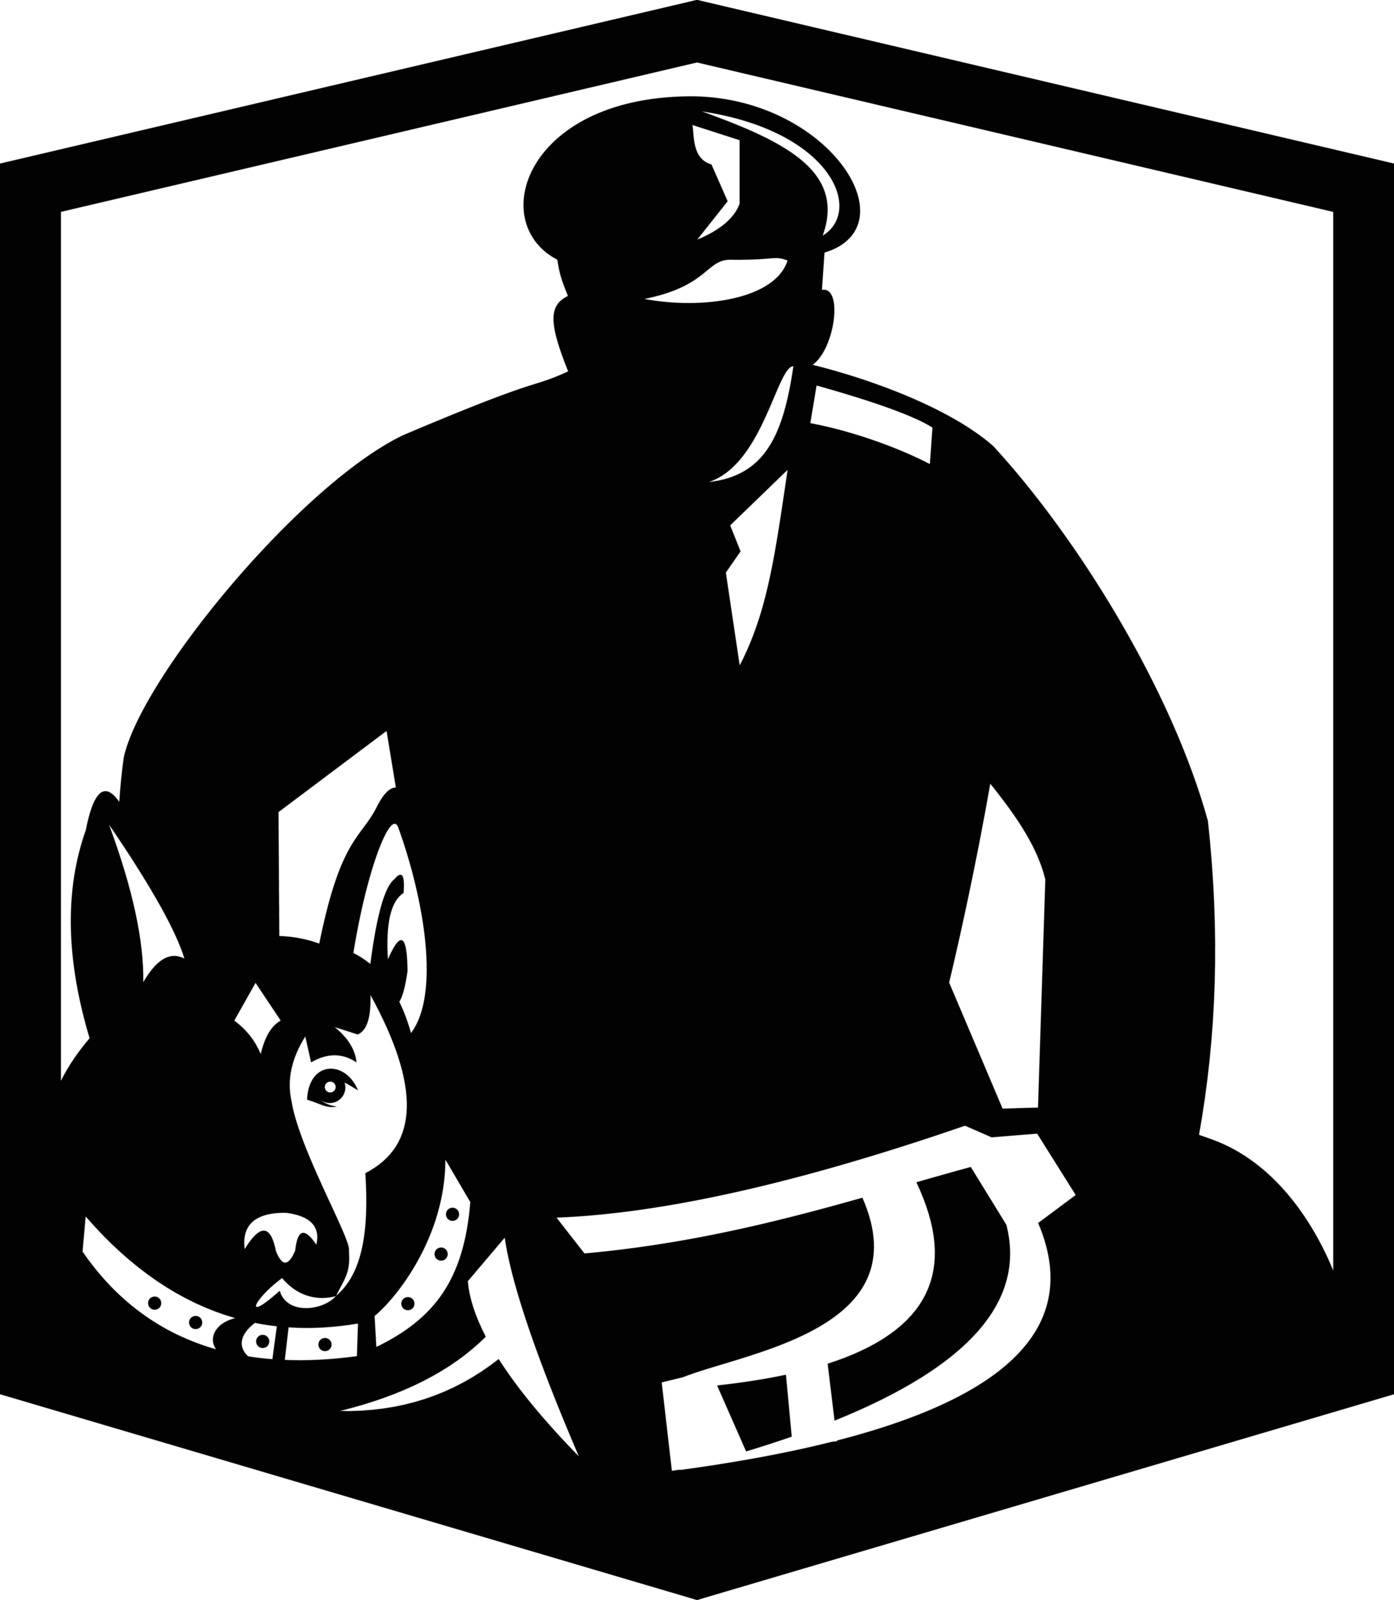 Illustration of a Canine Security Guard policeman police officer with police dog with facing front set inside shield crest on isolated background done in retro badge Black and White style.